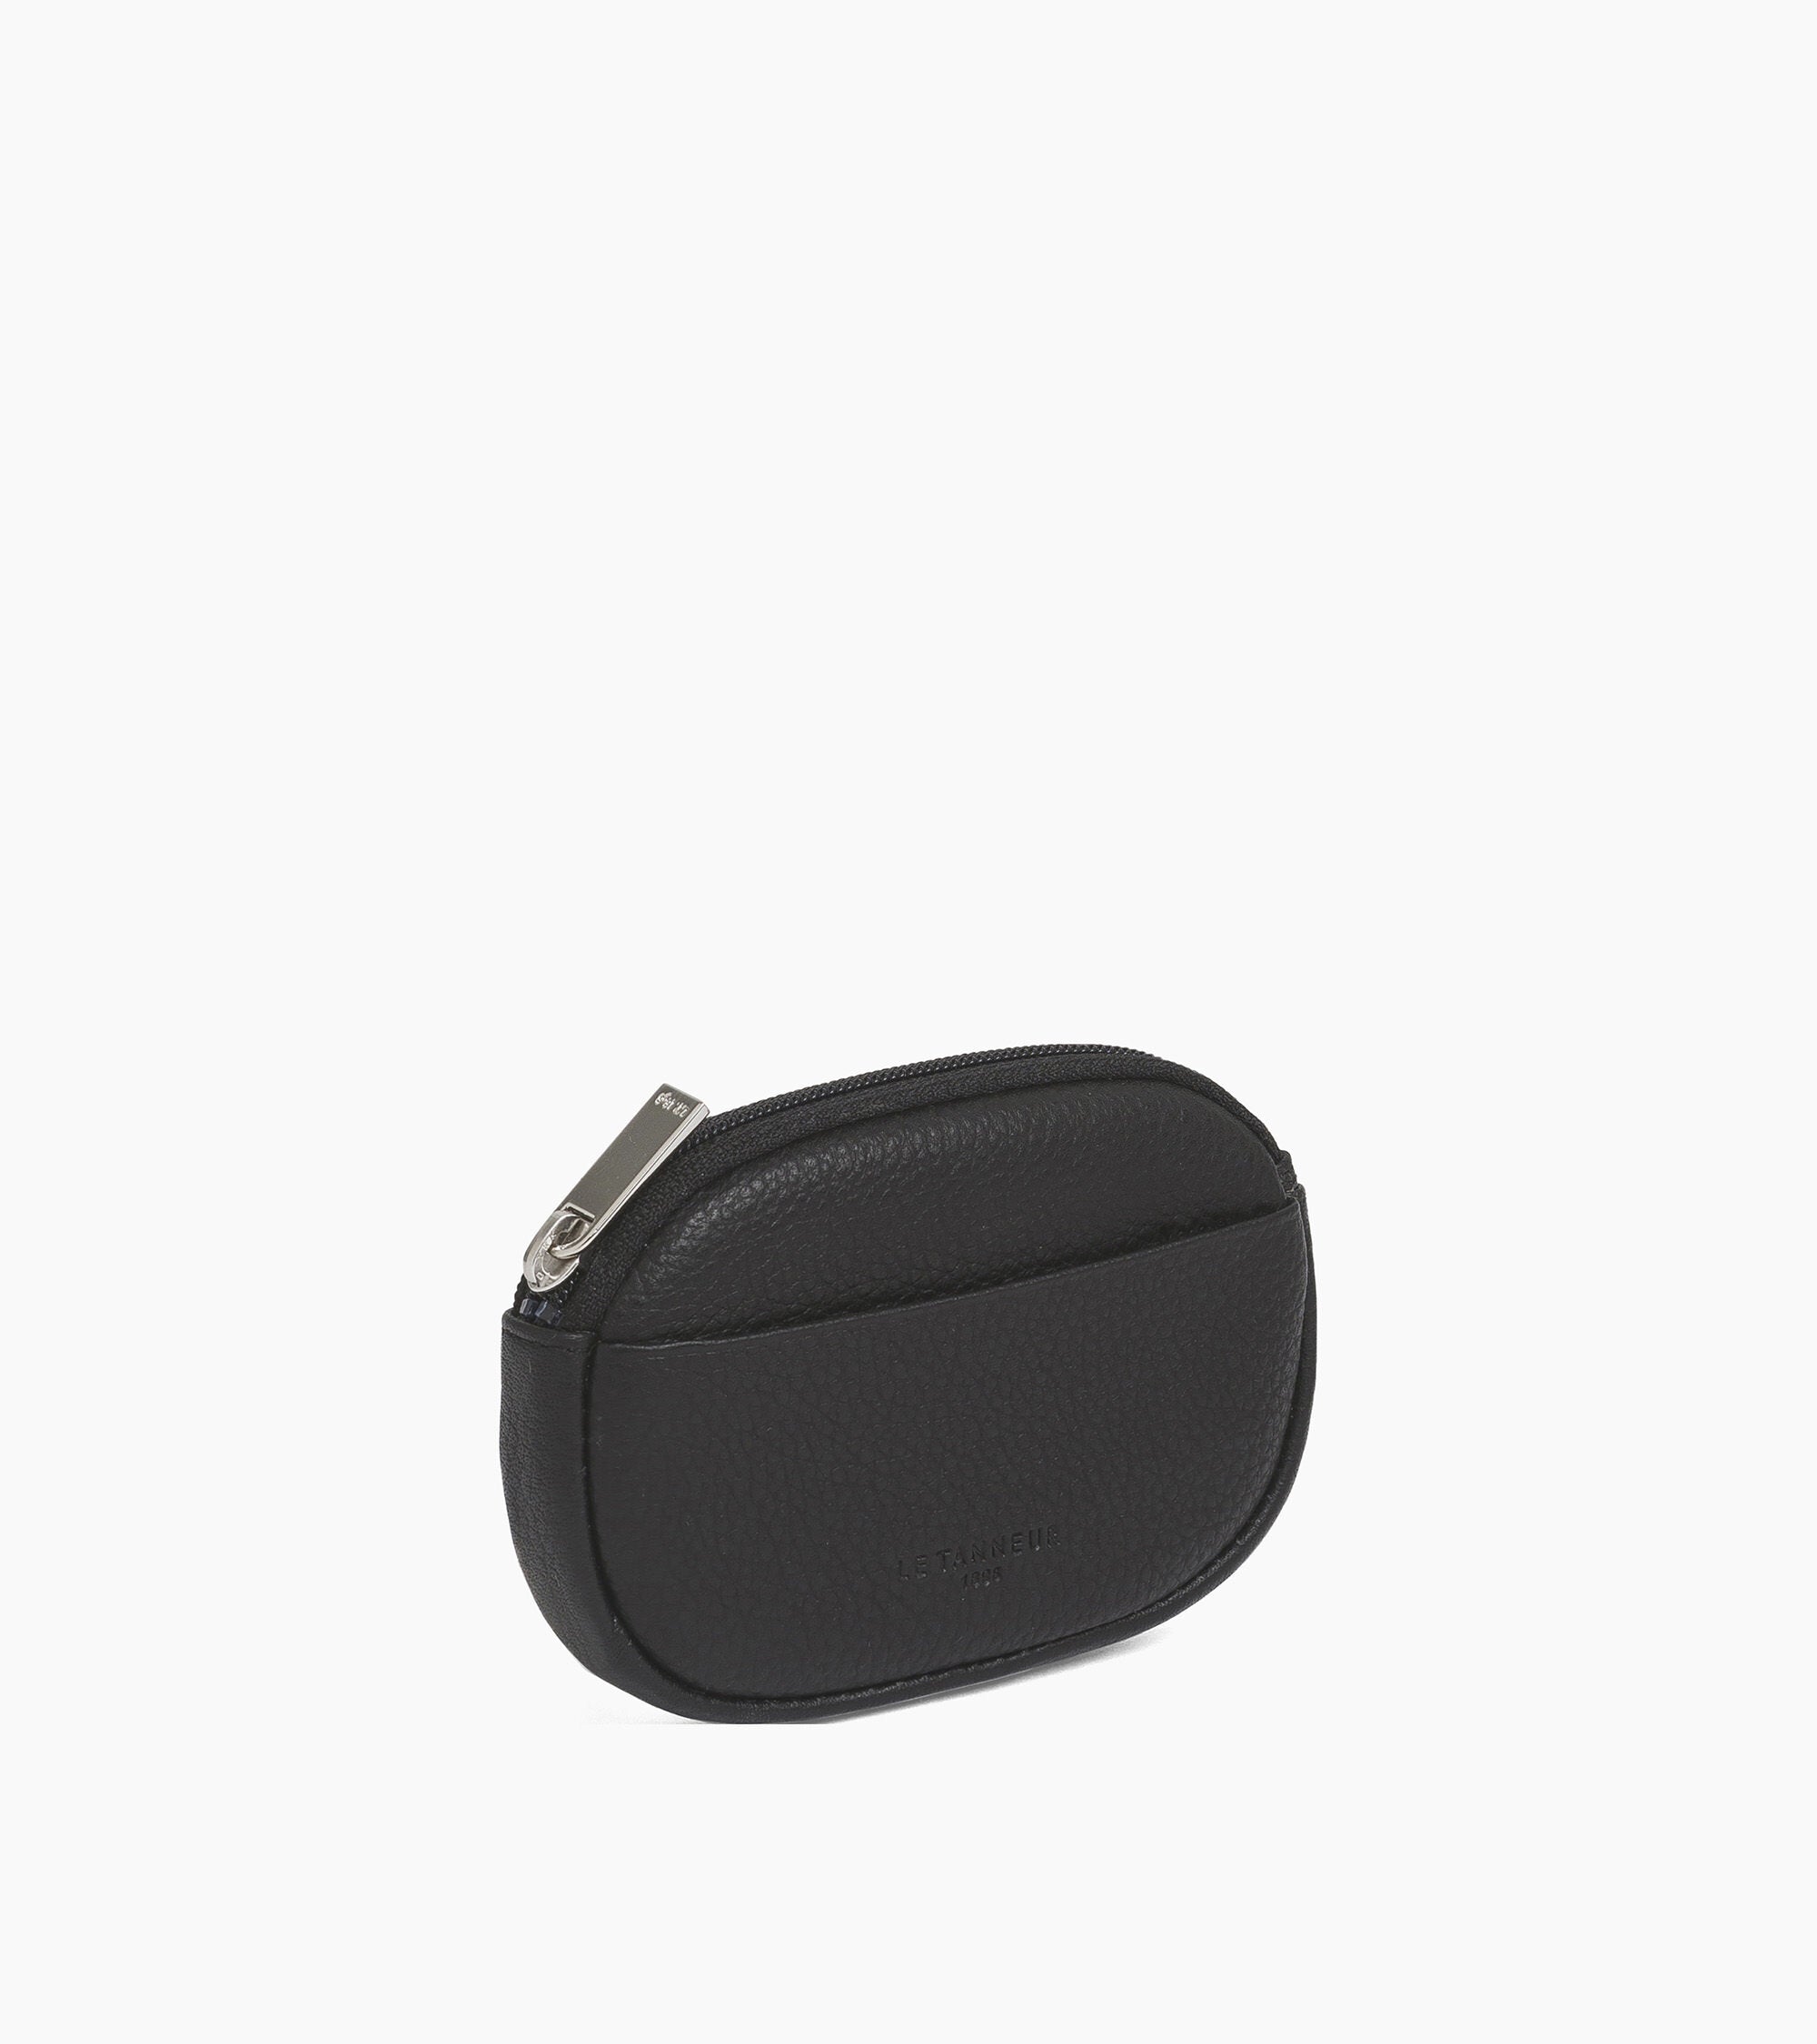 Zipped Charles pebbled leather coin wallet